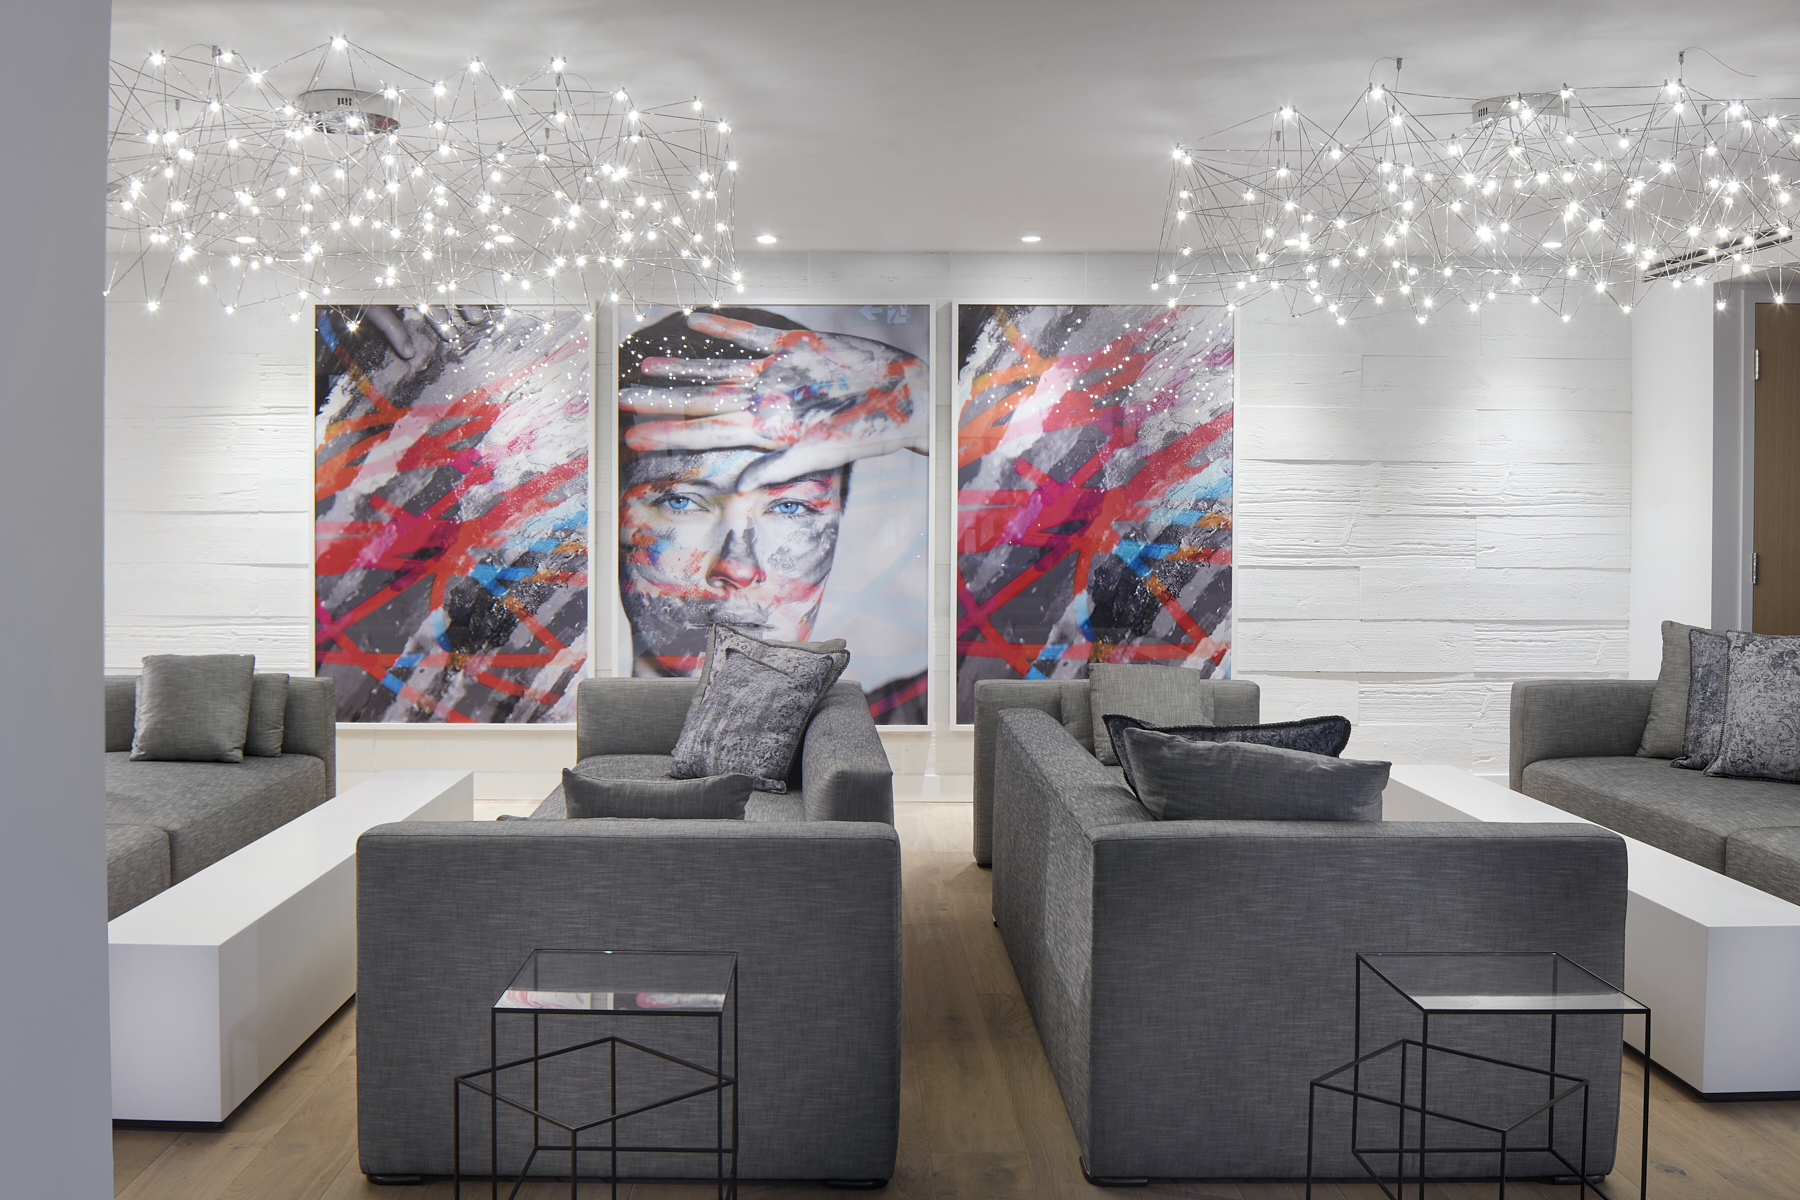 The Art Shoppe lounge with chic chandeliers, paintings and gray sofas.